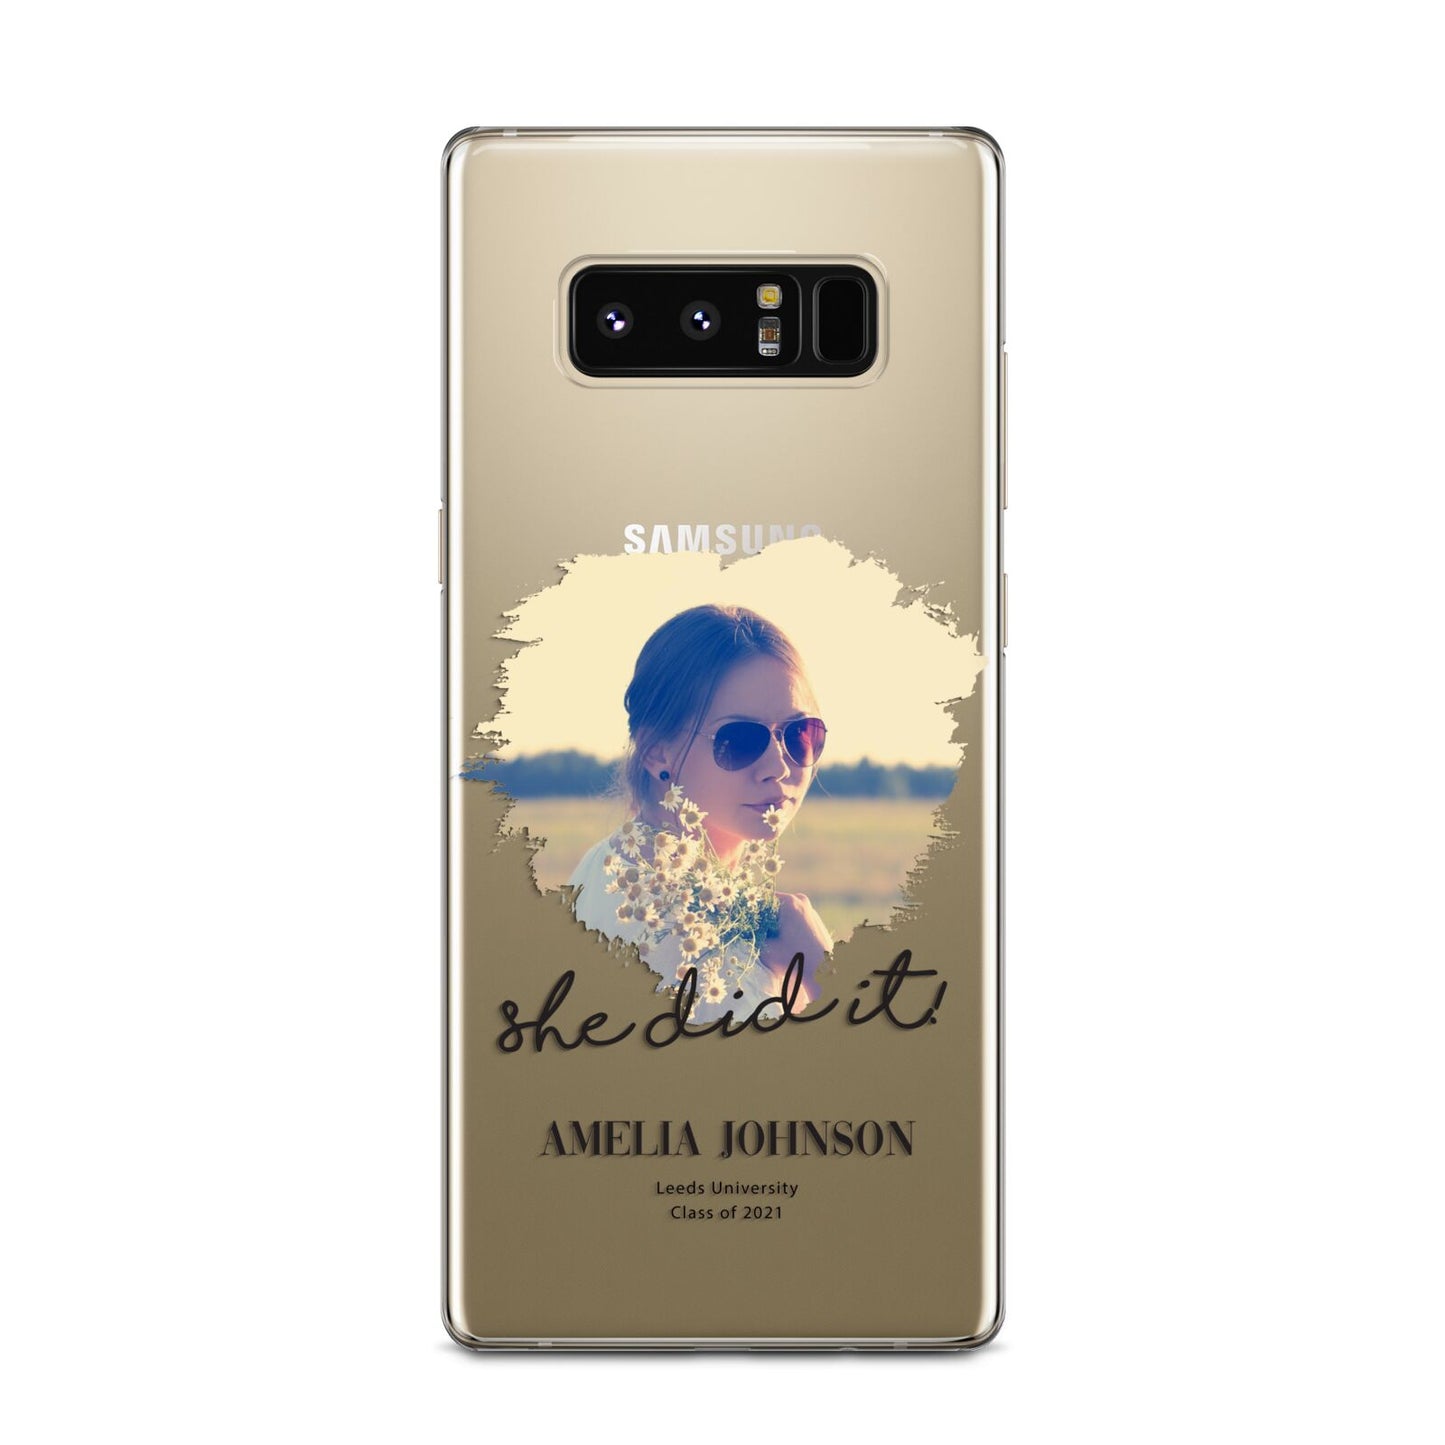 She Did It Graduation Photo with Name Samsung Galaxy Note 8 Case